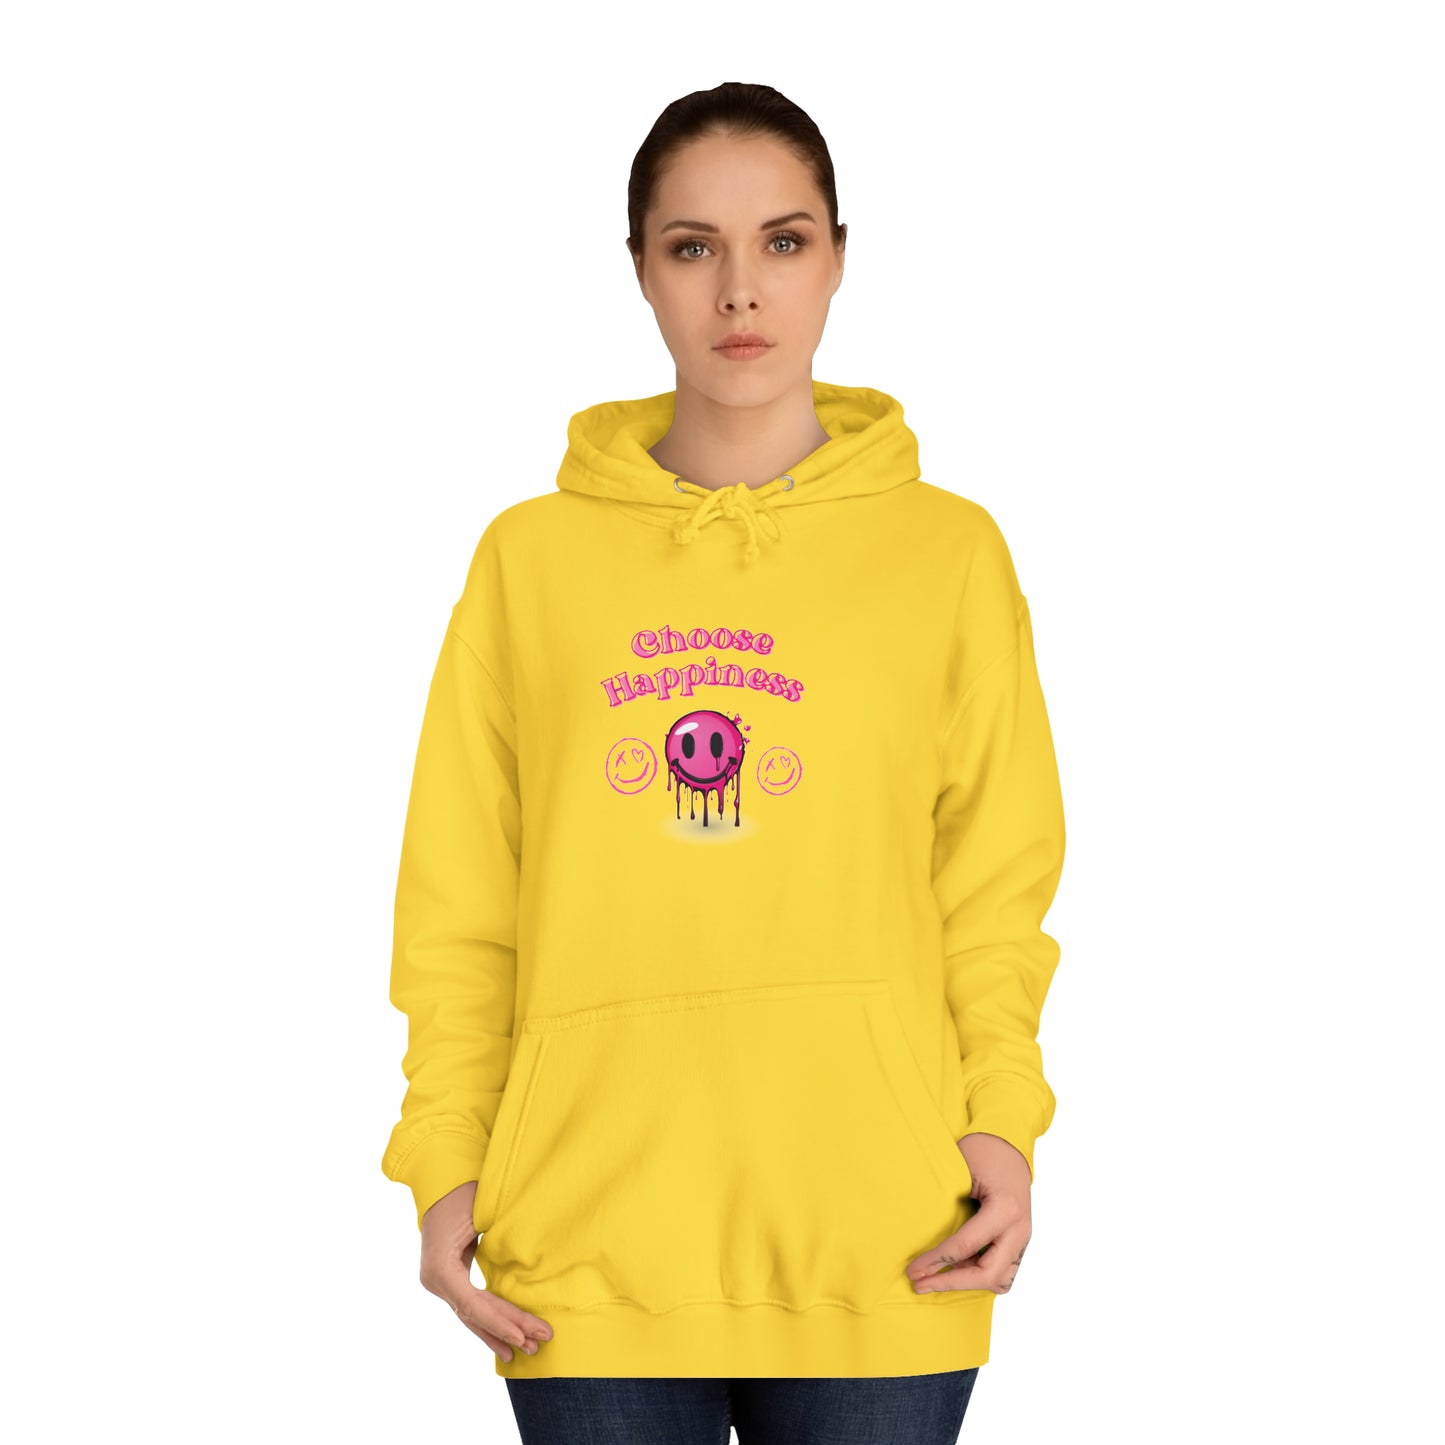 "Why Aren't You Smiling?" Unisex College Hoodie